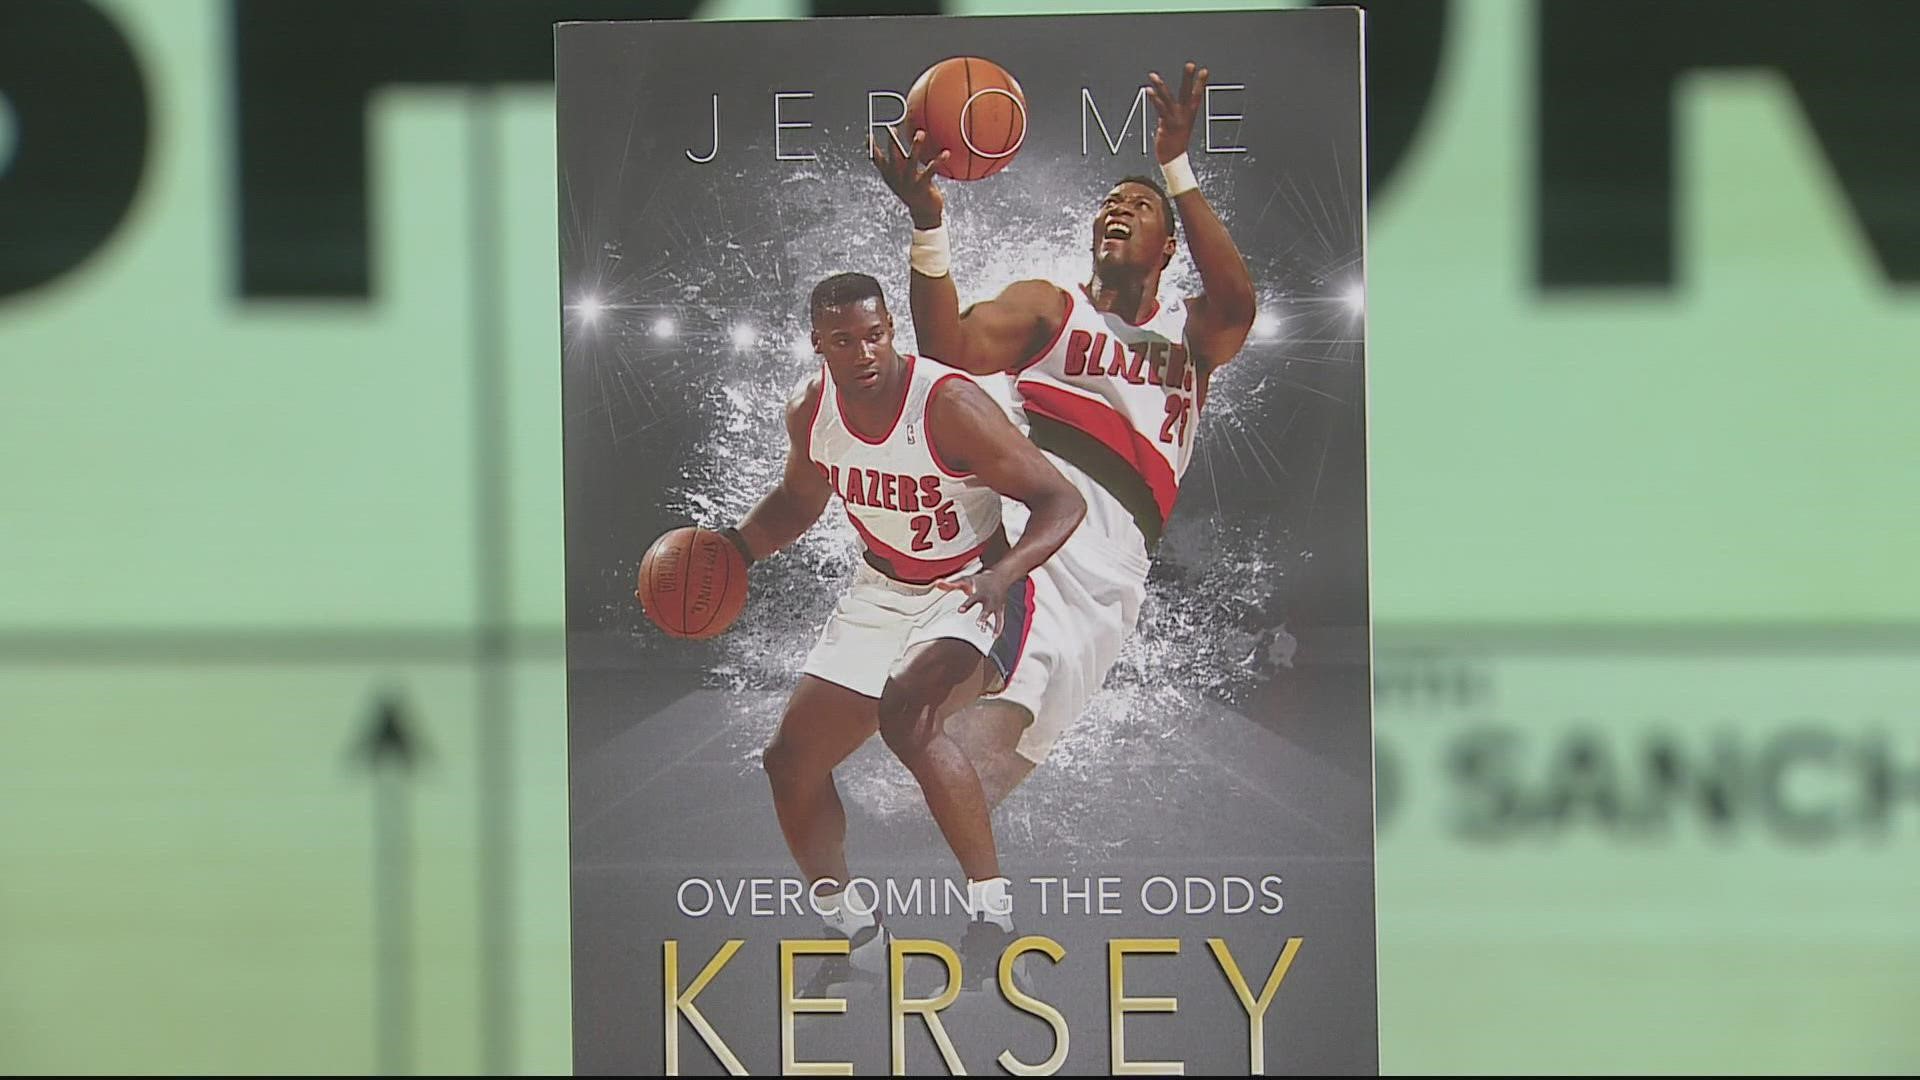 Kerry Eggers is the author of the new book, "Jerome Kersey: Overcoming the Odds."